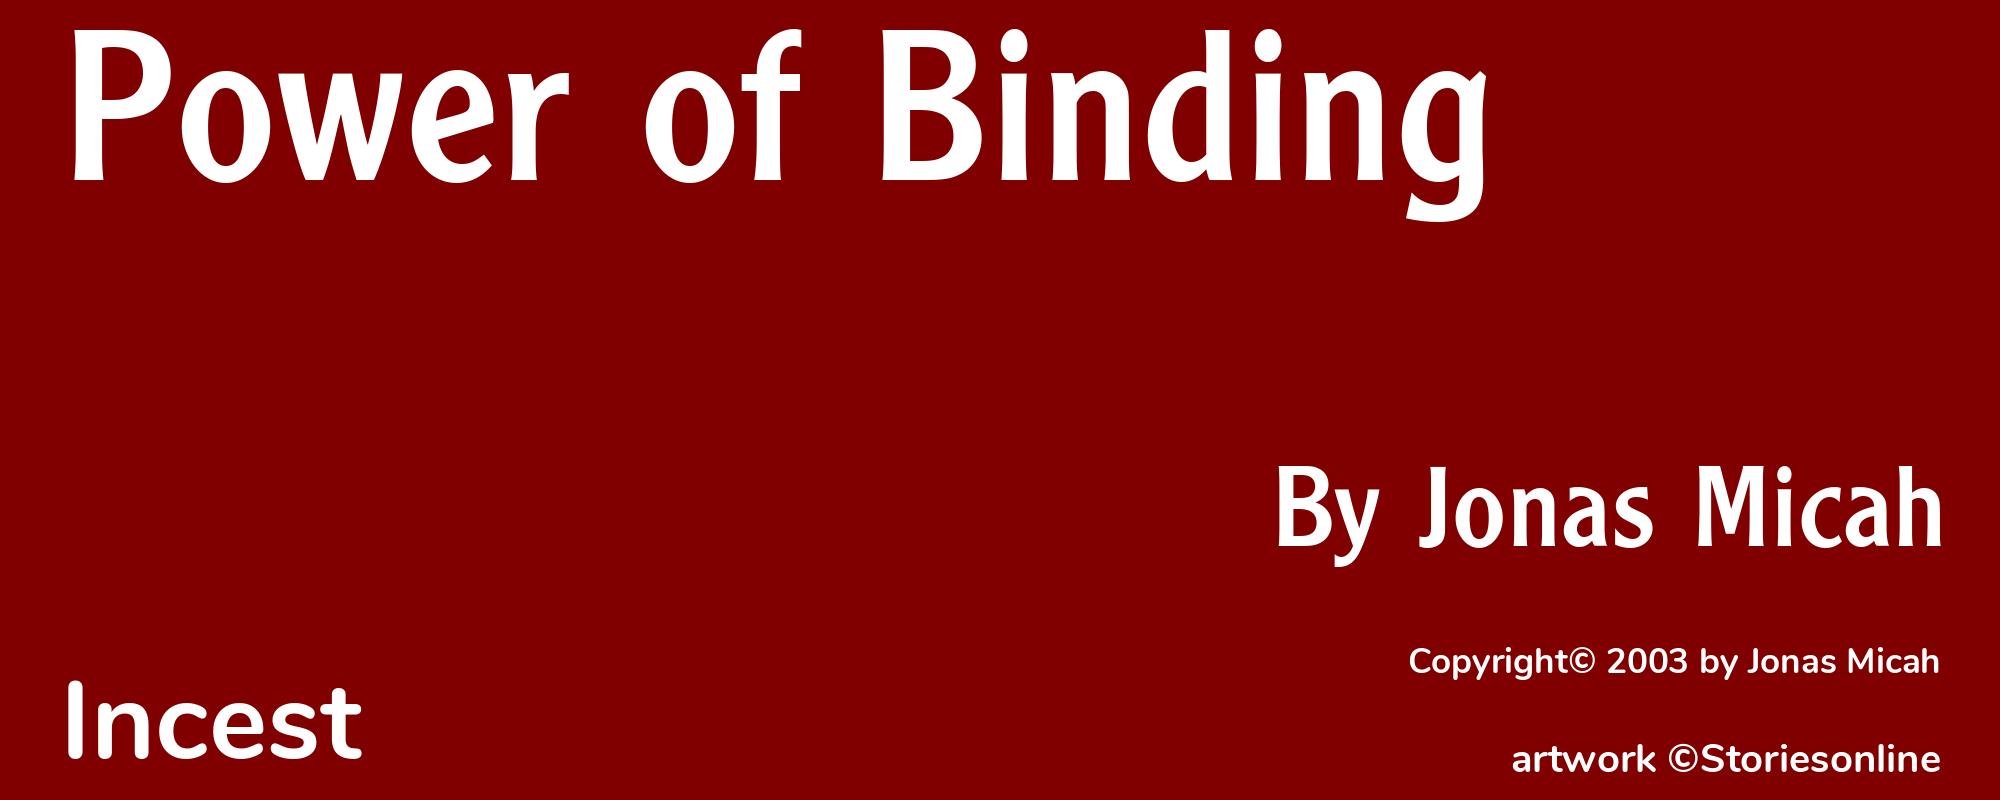 Power of Binding - Cover